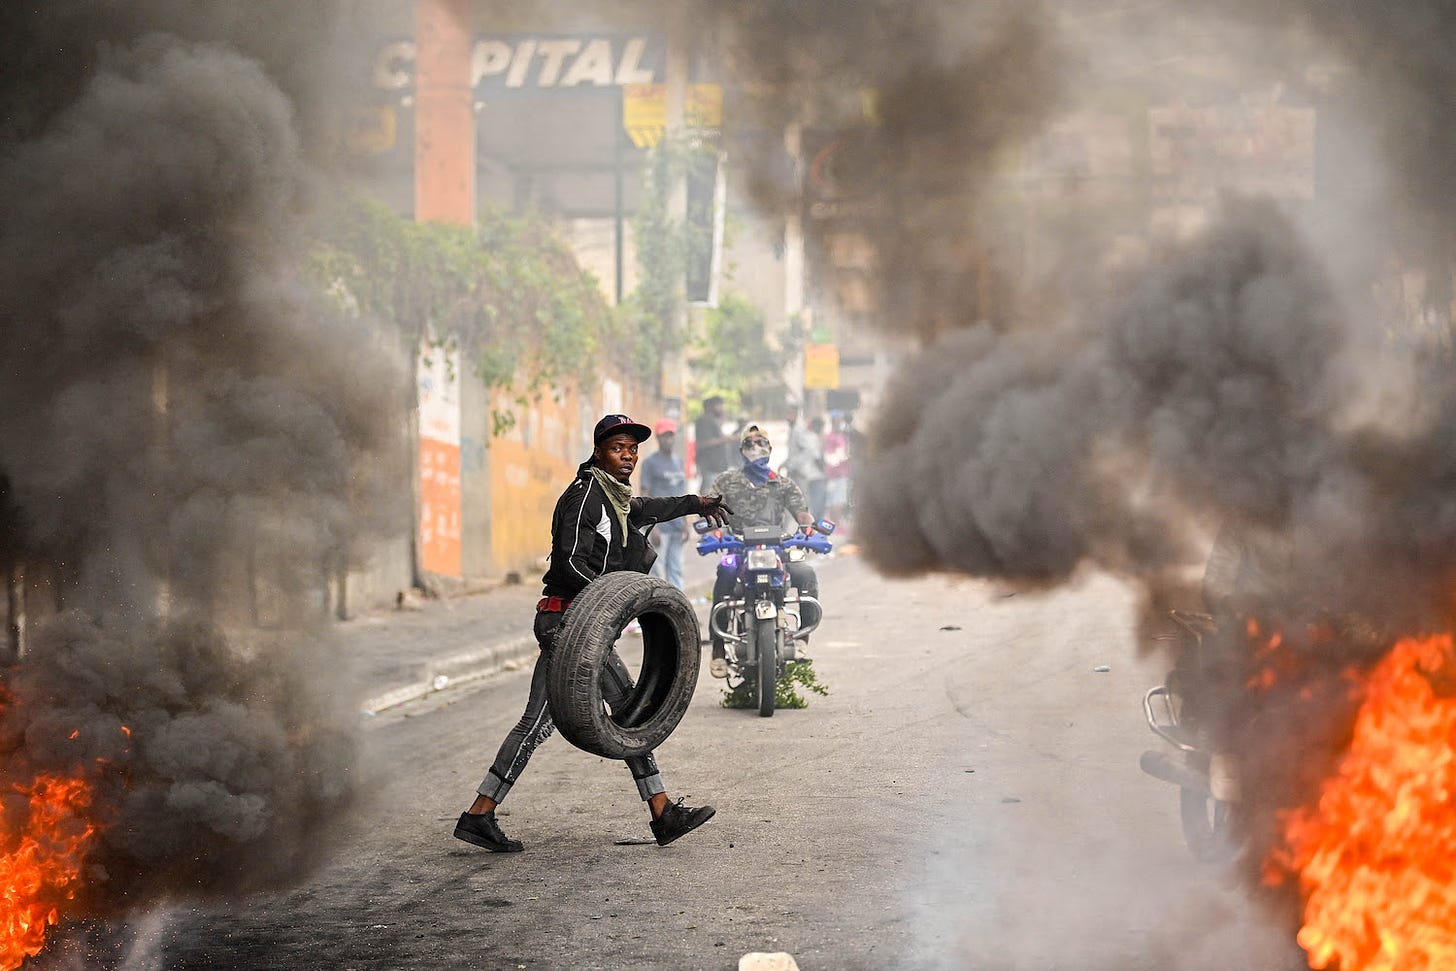 A protester burns tires during a demonstration calling for the resignation of acting Prime Minister Ariel Henry in Port-au-Prince.